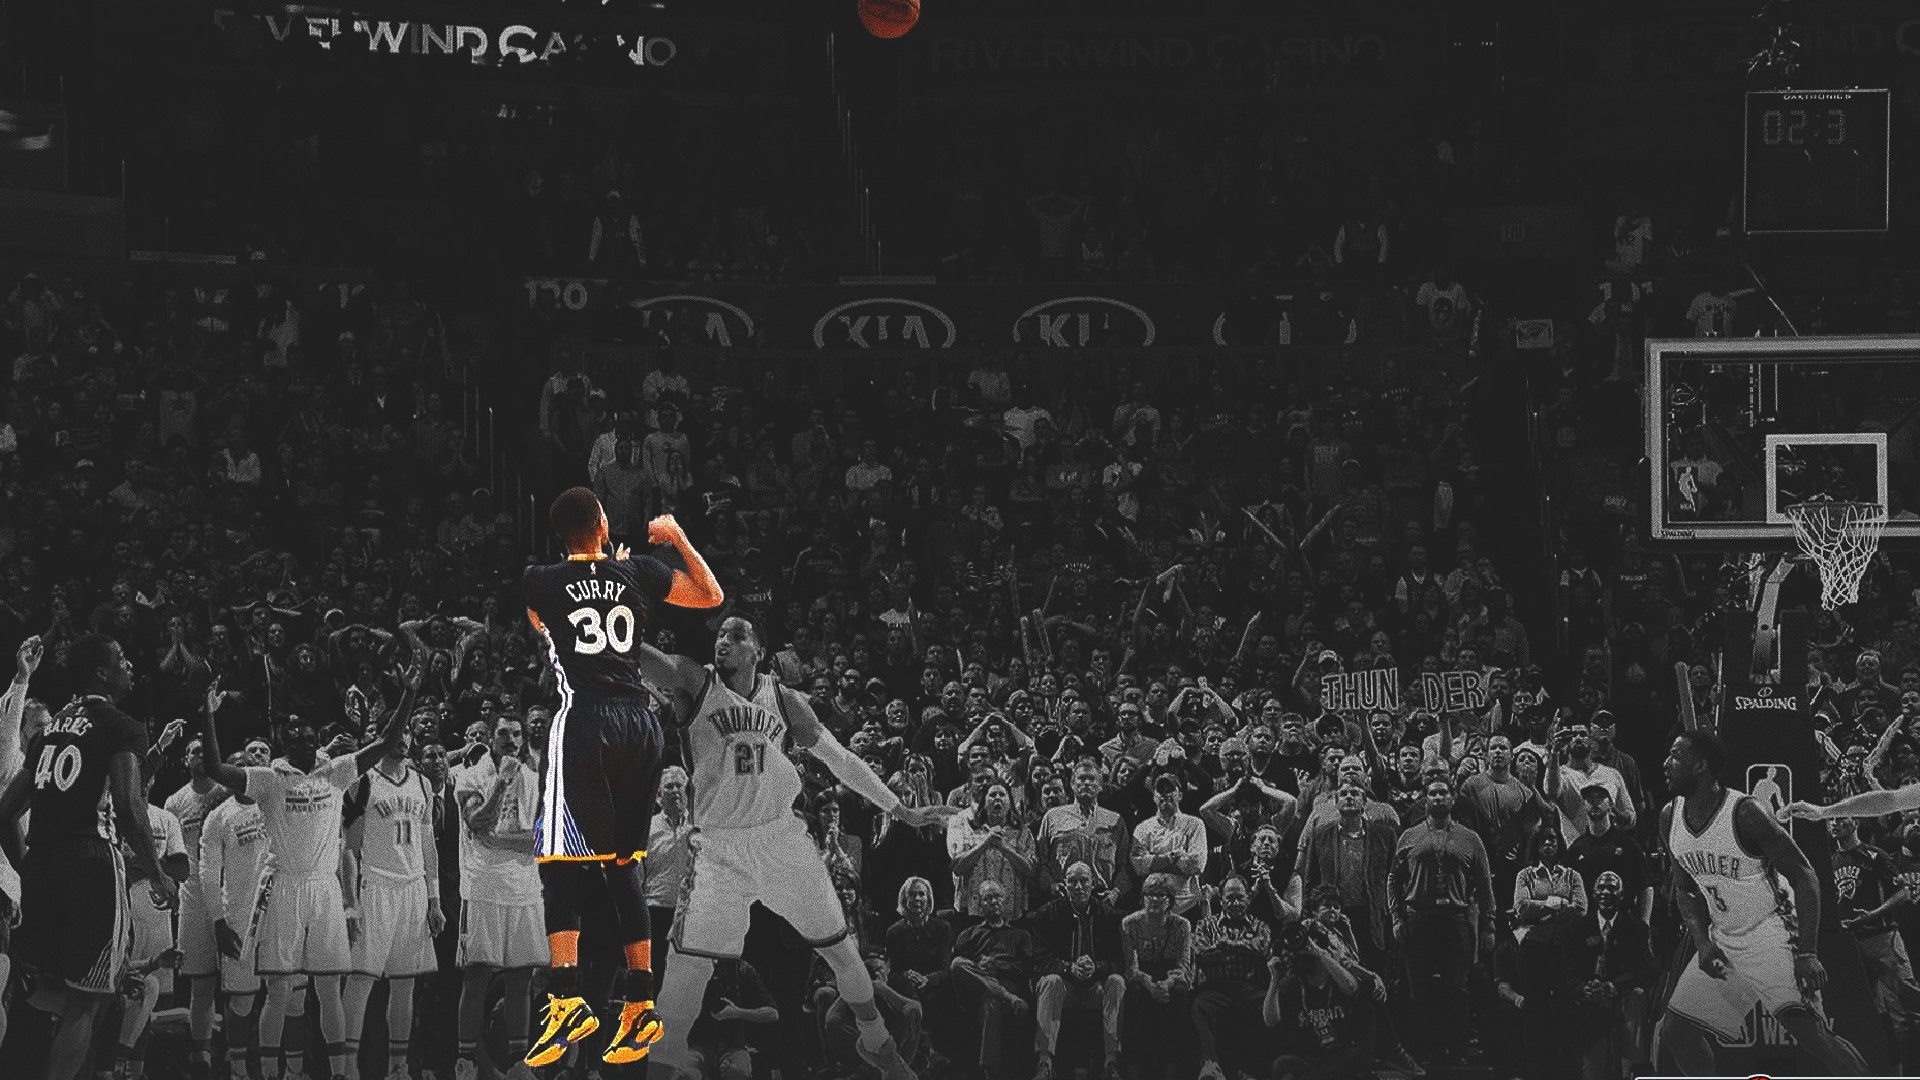 Wallpapers HD NBA with image dimensions 1920x1080 pixel. You can make this wallpaper for your Desktop Computer Backgrounds, Windows or Mac Screensavers, iPhone Lock screen, Tablet or Android and another Mobile Phone device